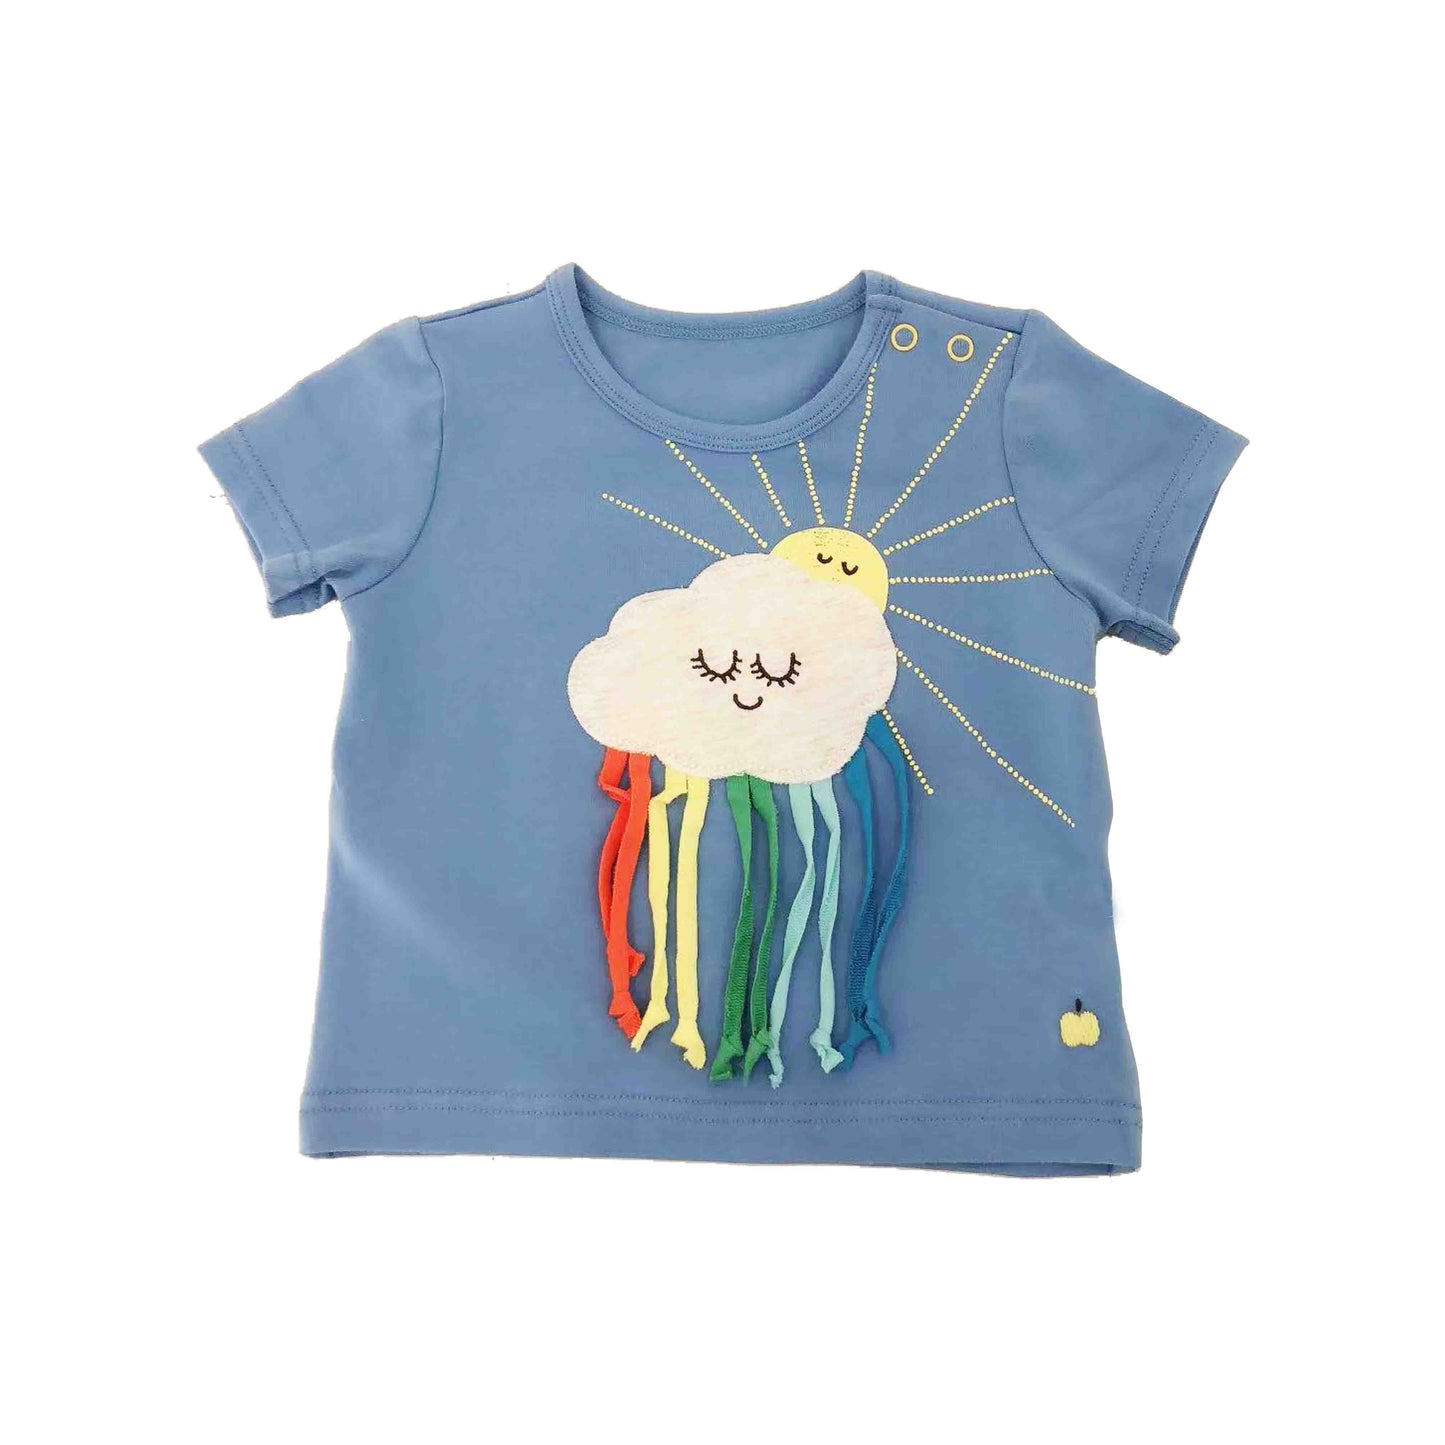 TSHIRT - BABY - 3 COLOR (BLUE/GREY/PINK) - L-CHELSEA